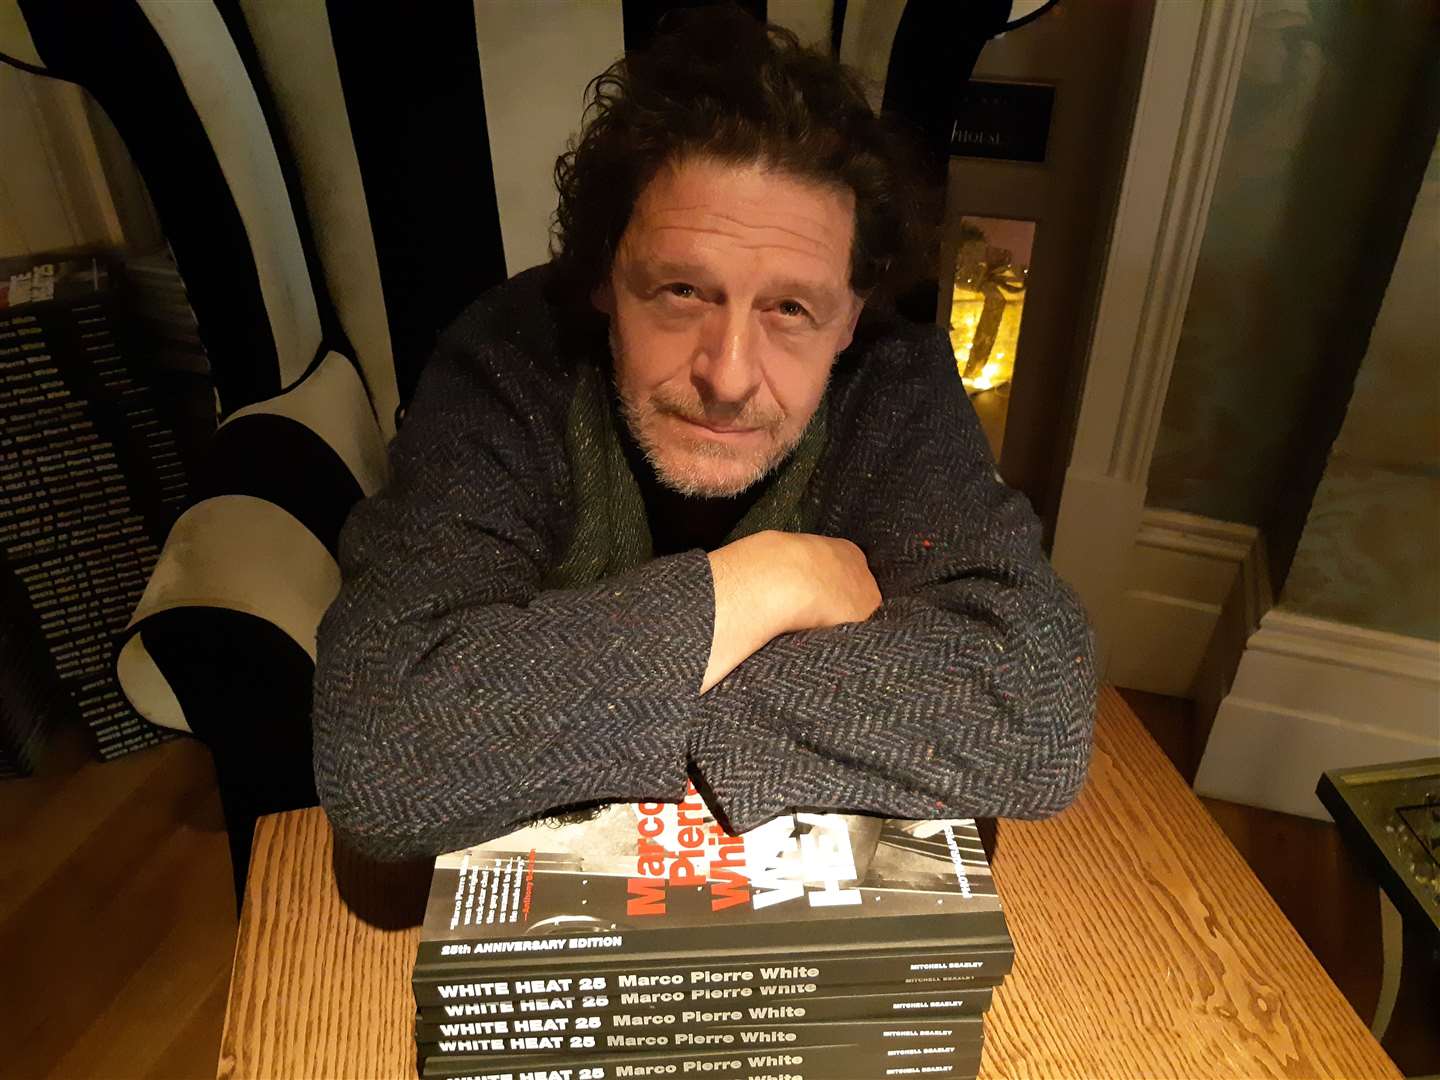 Marco Pierre White at Dover Best Western with his book White Heat 25. Picture: Sam Lennon